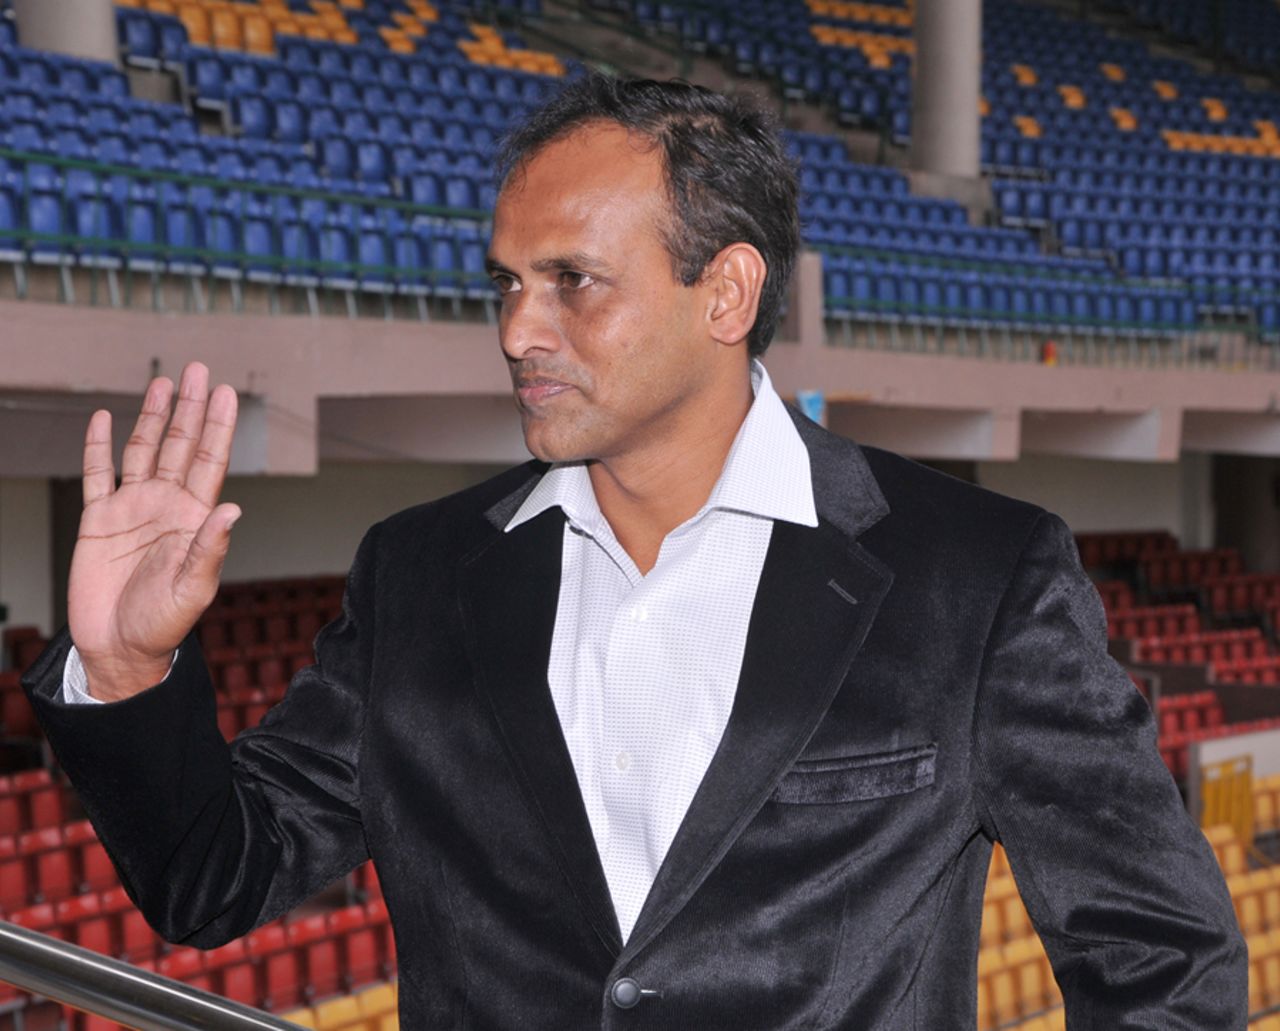 Yere Goud after announcing his retirement, Bangalore, October 29, 2012